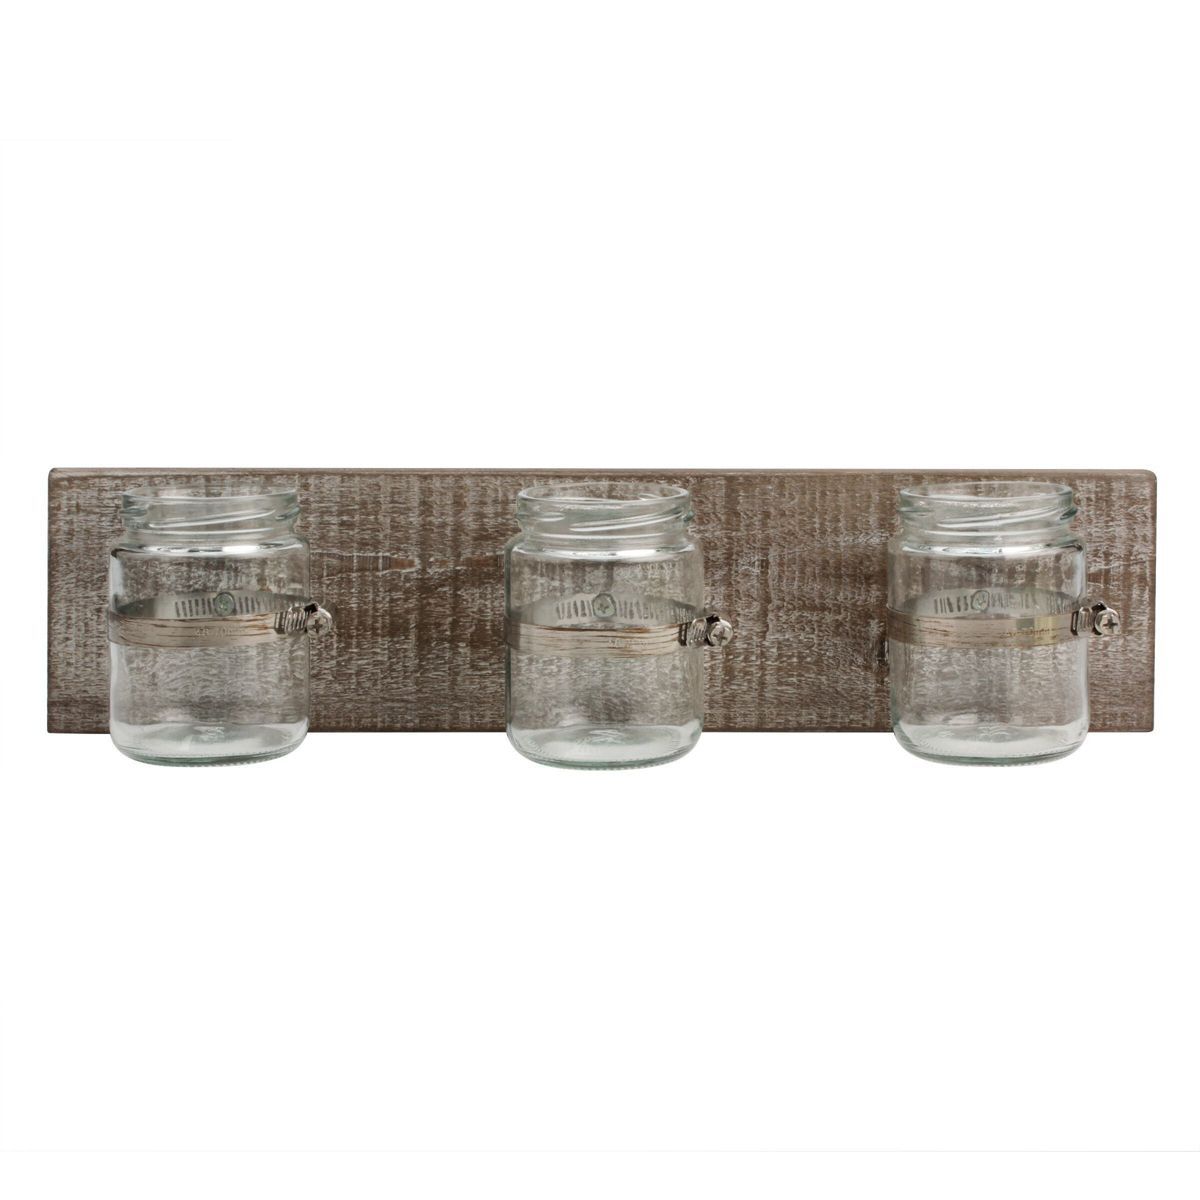 15.7" x 3.7" Rustic Wooden Wall Decor with 3 Glass Jars Worn White/Brown - Stonebriar Collection | Target